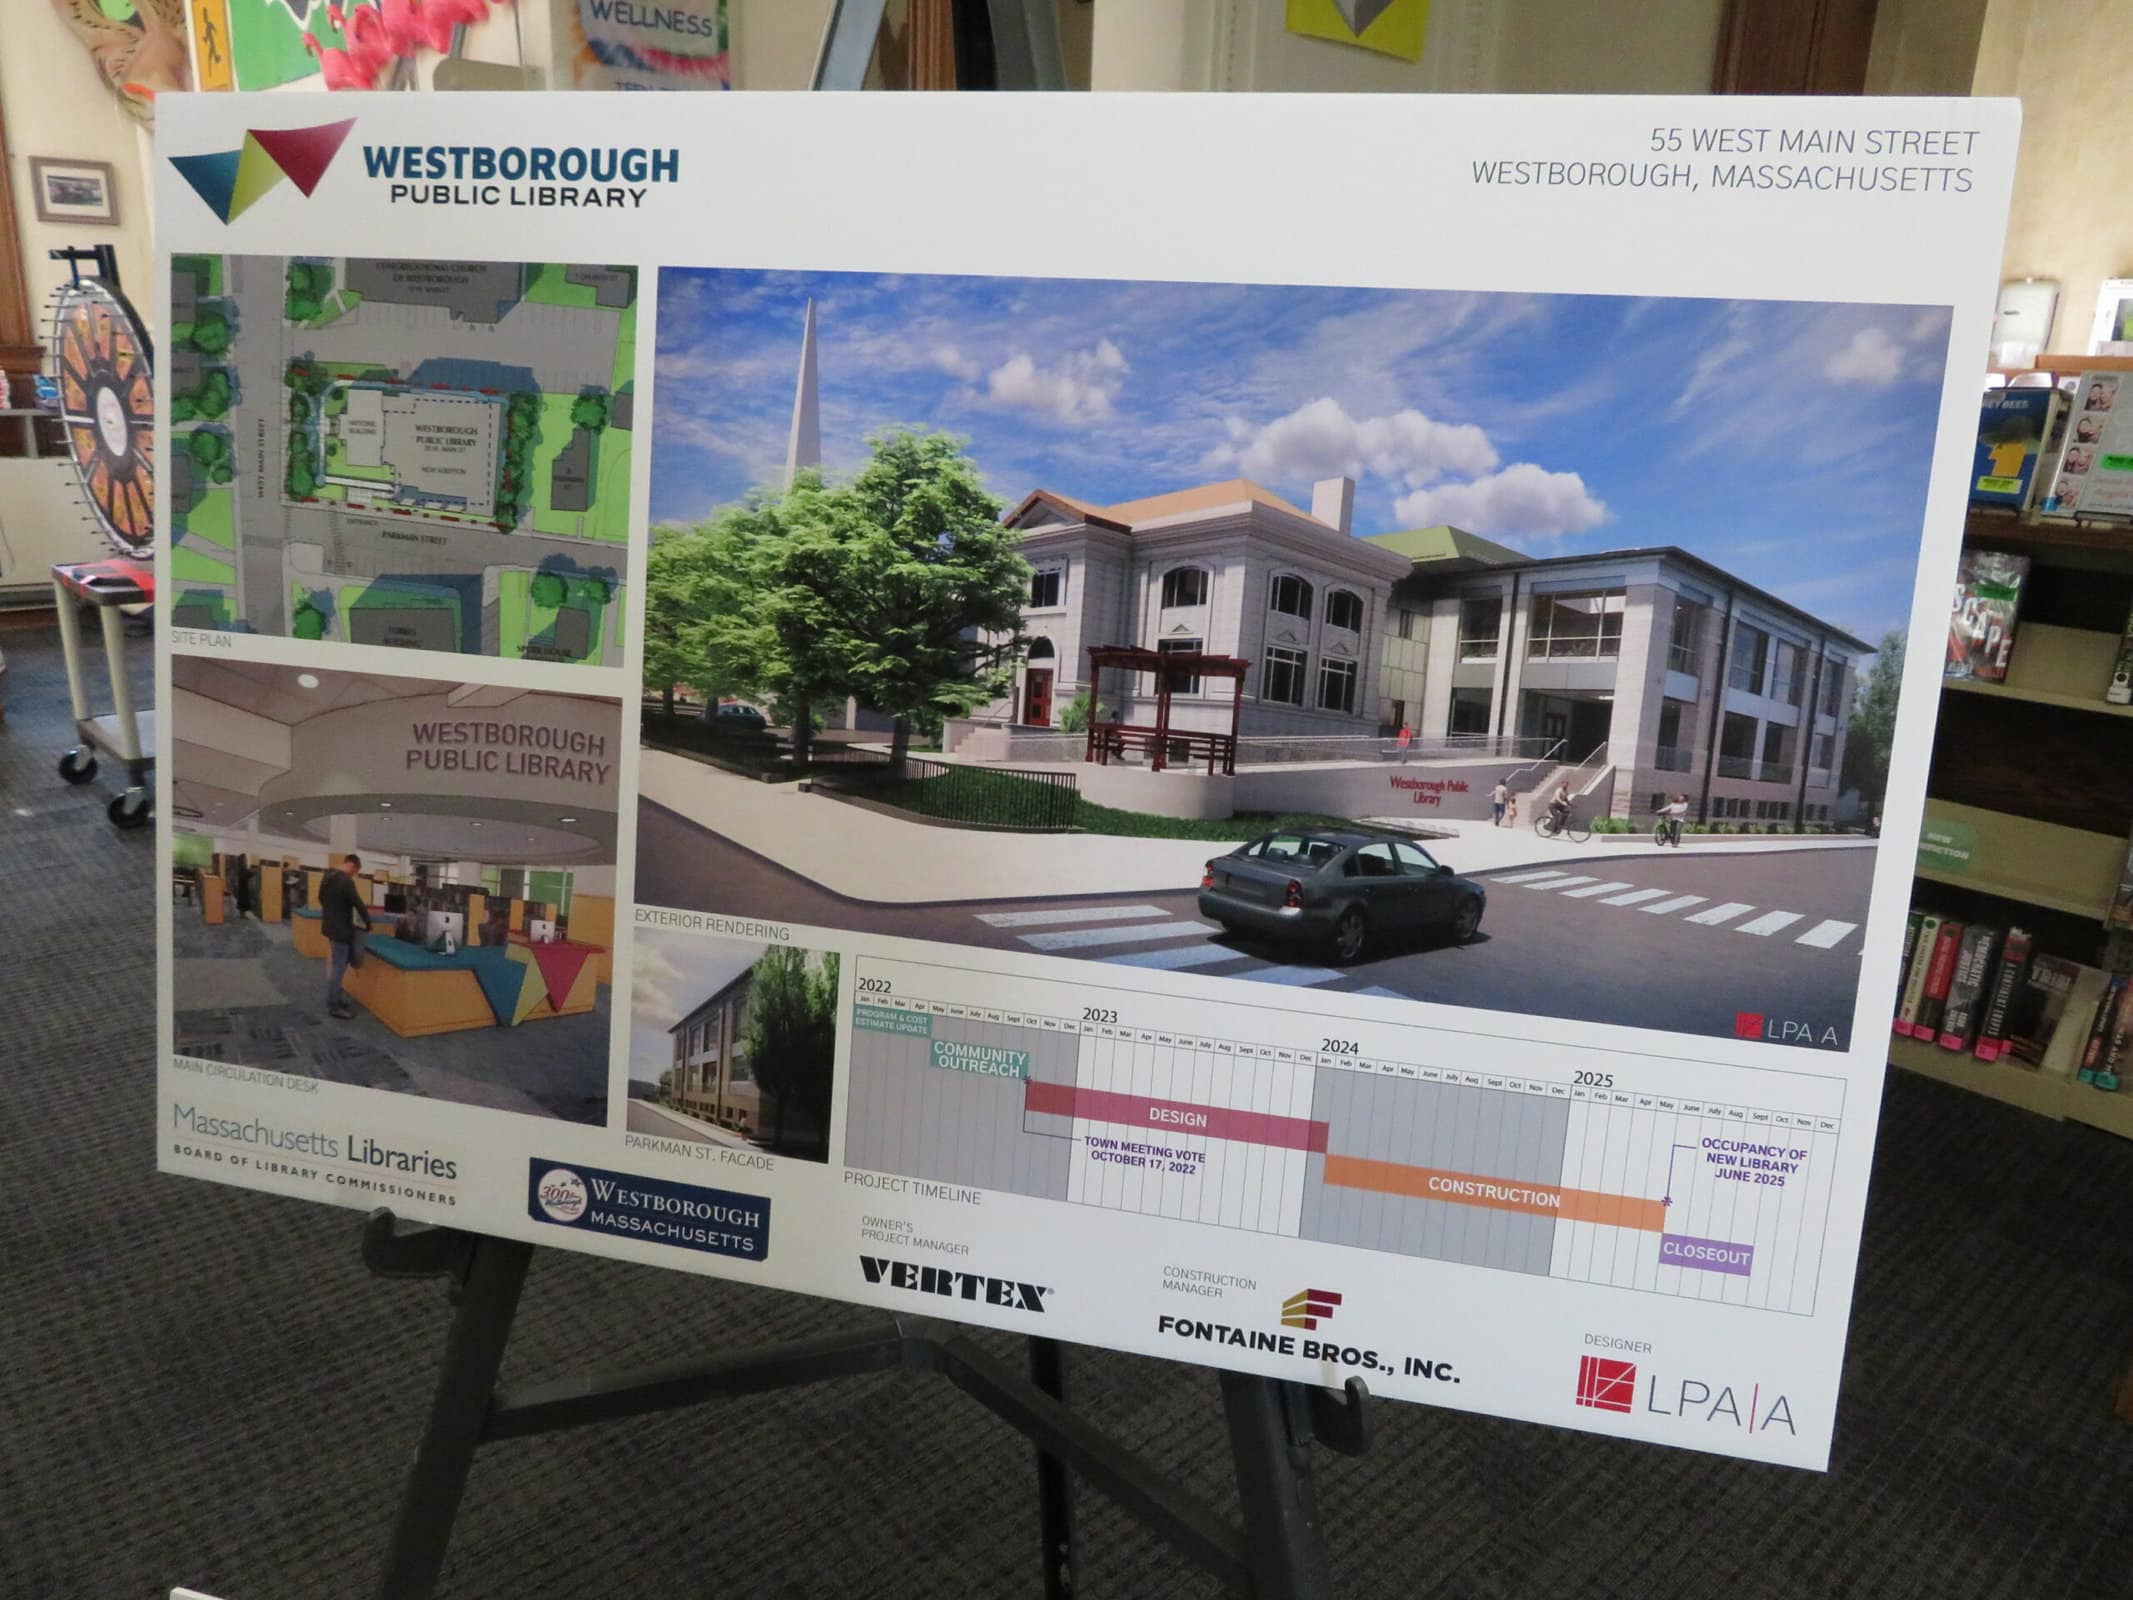 Seeking approval for building project, Westborough library hosts open house